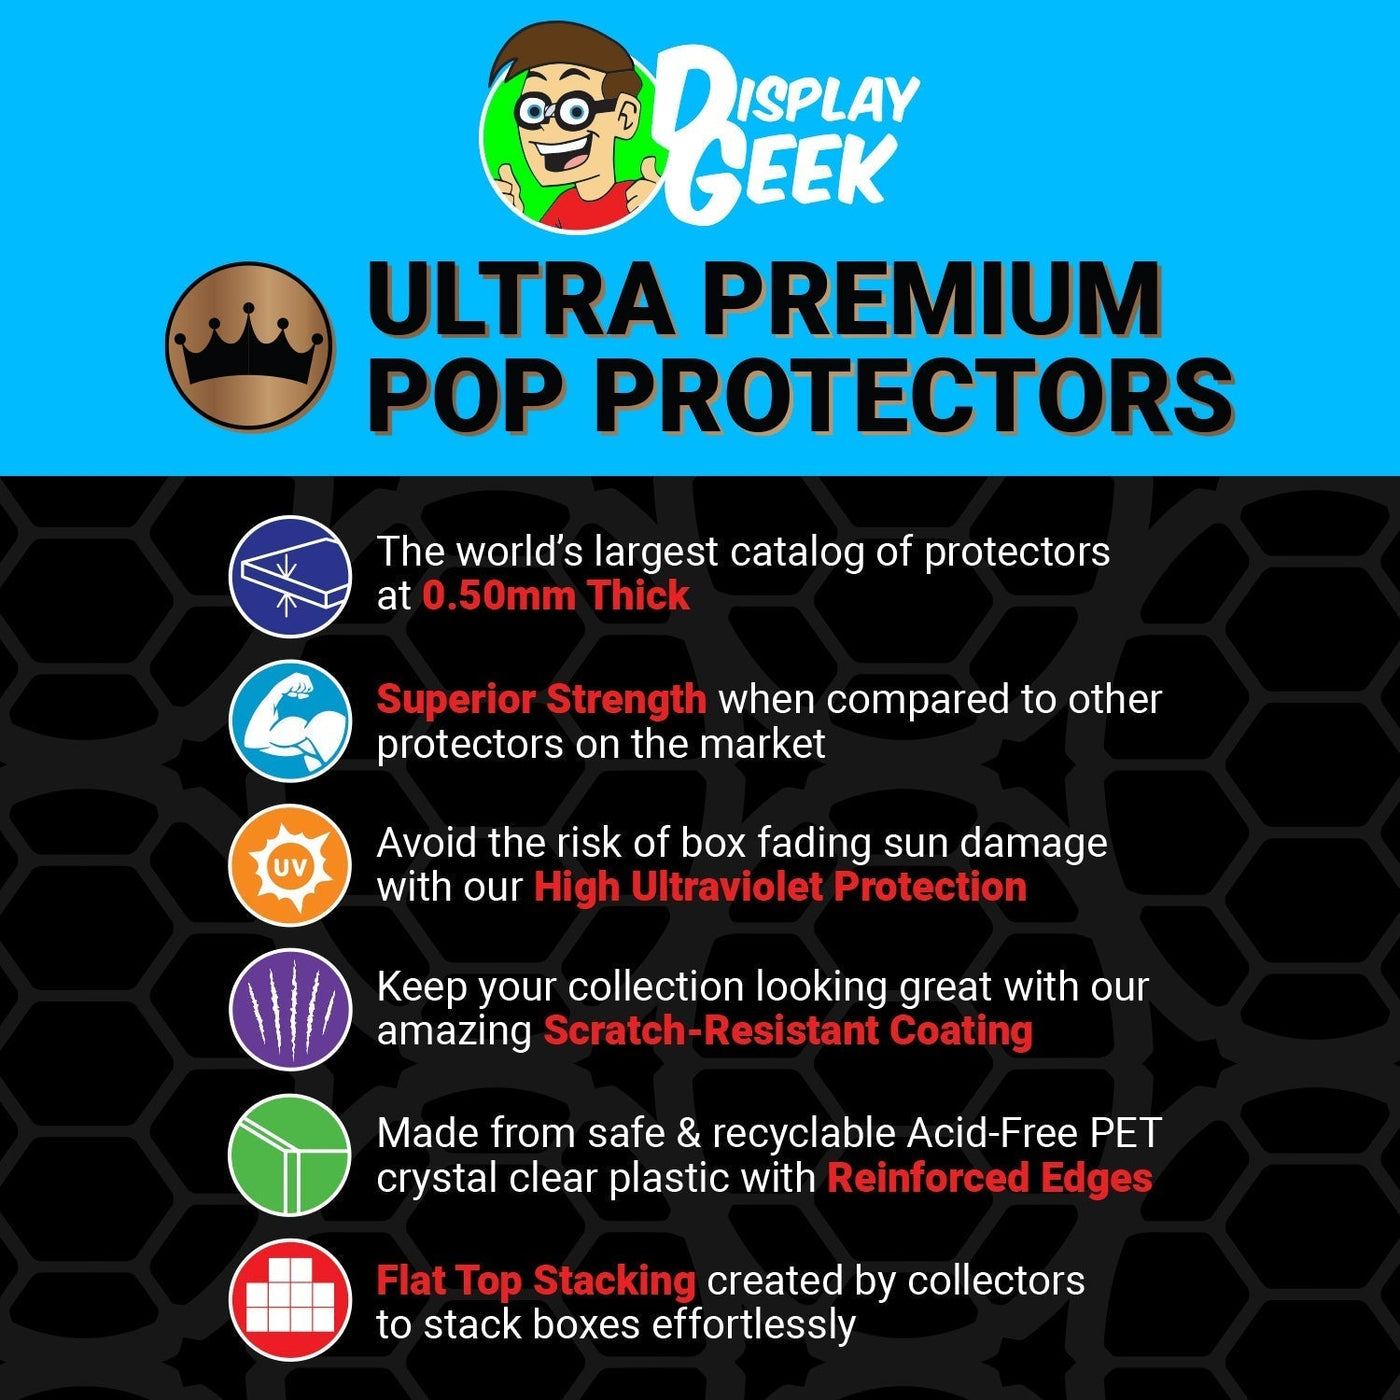 Pop Protector for 2 Pack Green Giant & Sprout Metallic Funko Pop on The Protector Guide App by Display Geek